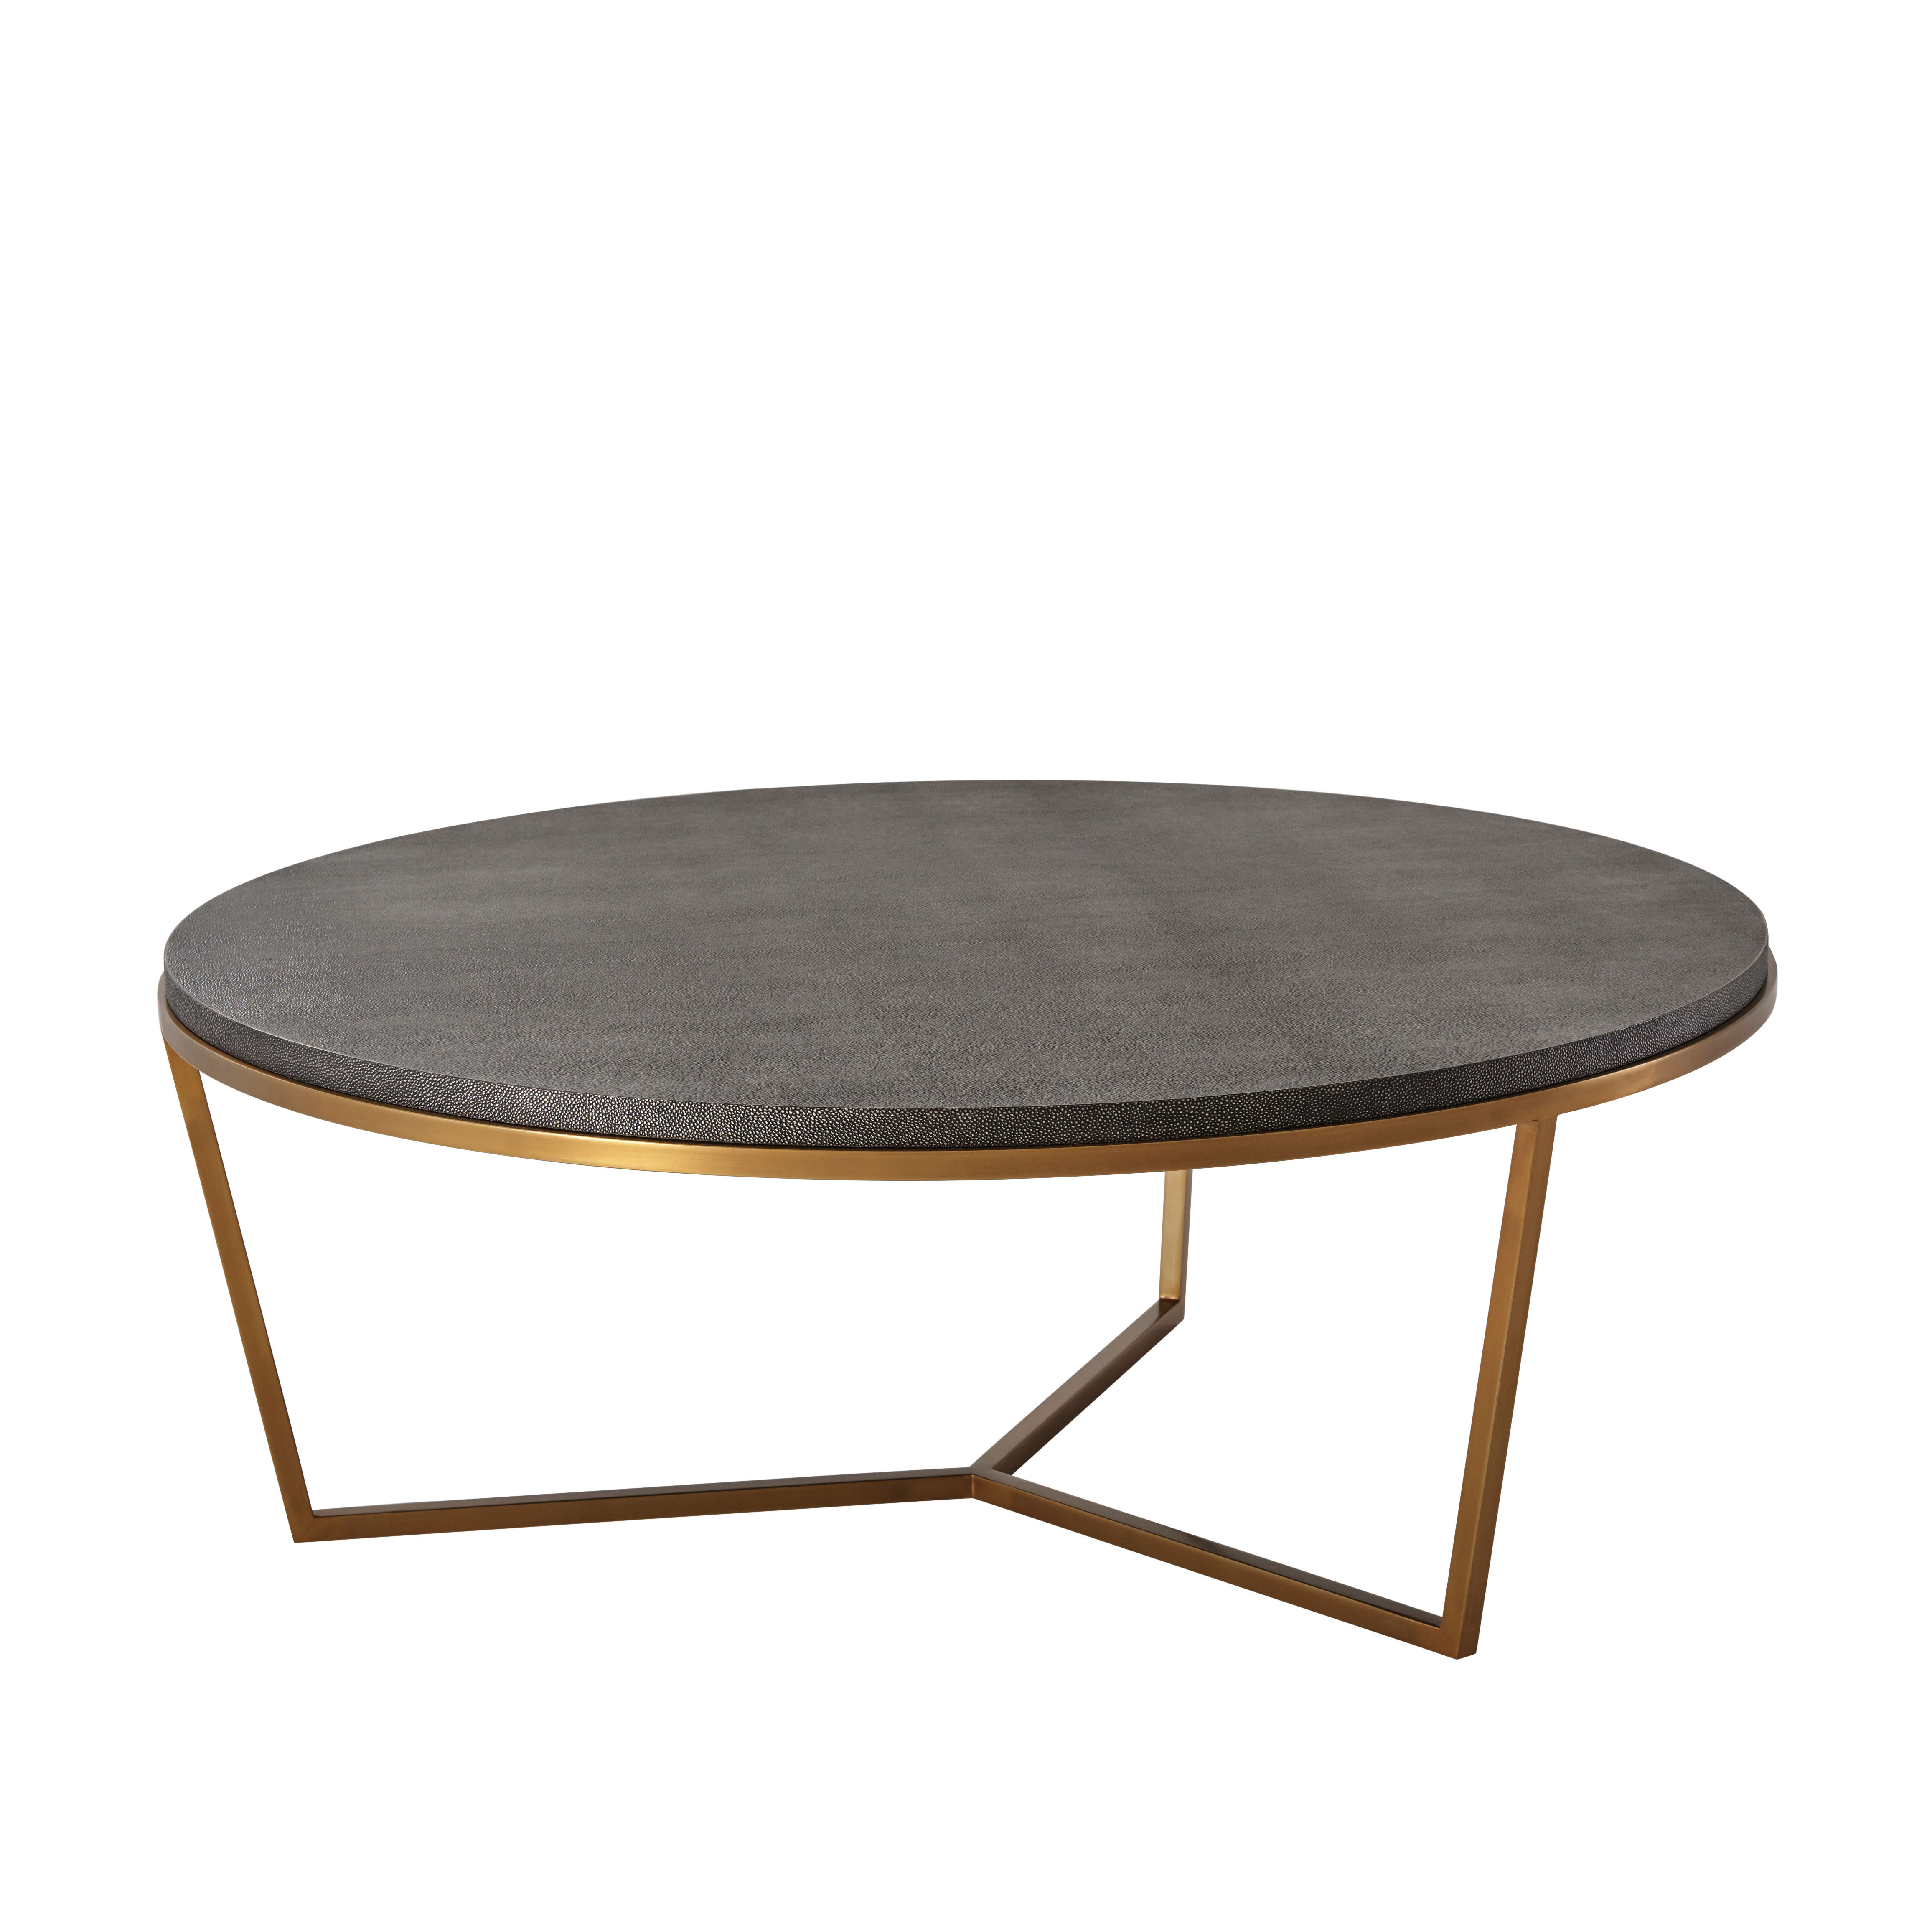 FISHER ROUND COCKTAIL TABLE (SHAGREEN)|TAS51036.C096